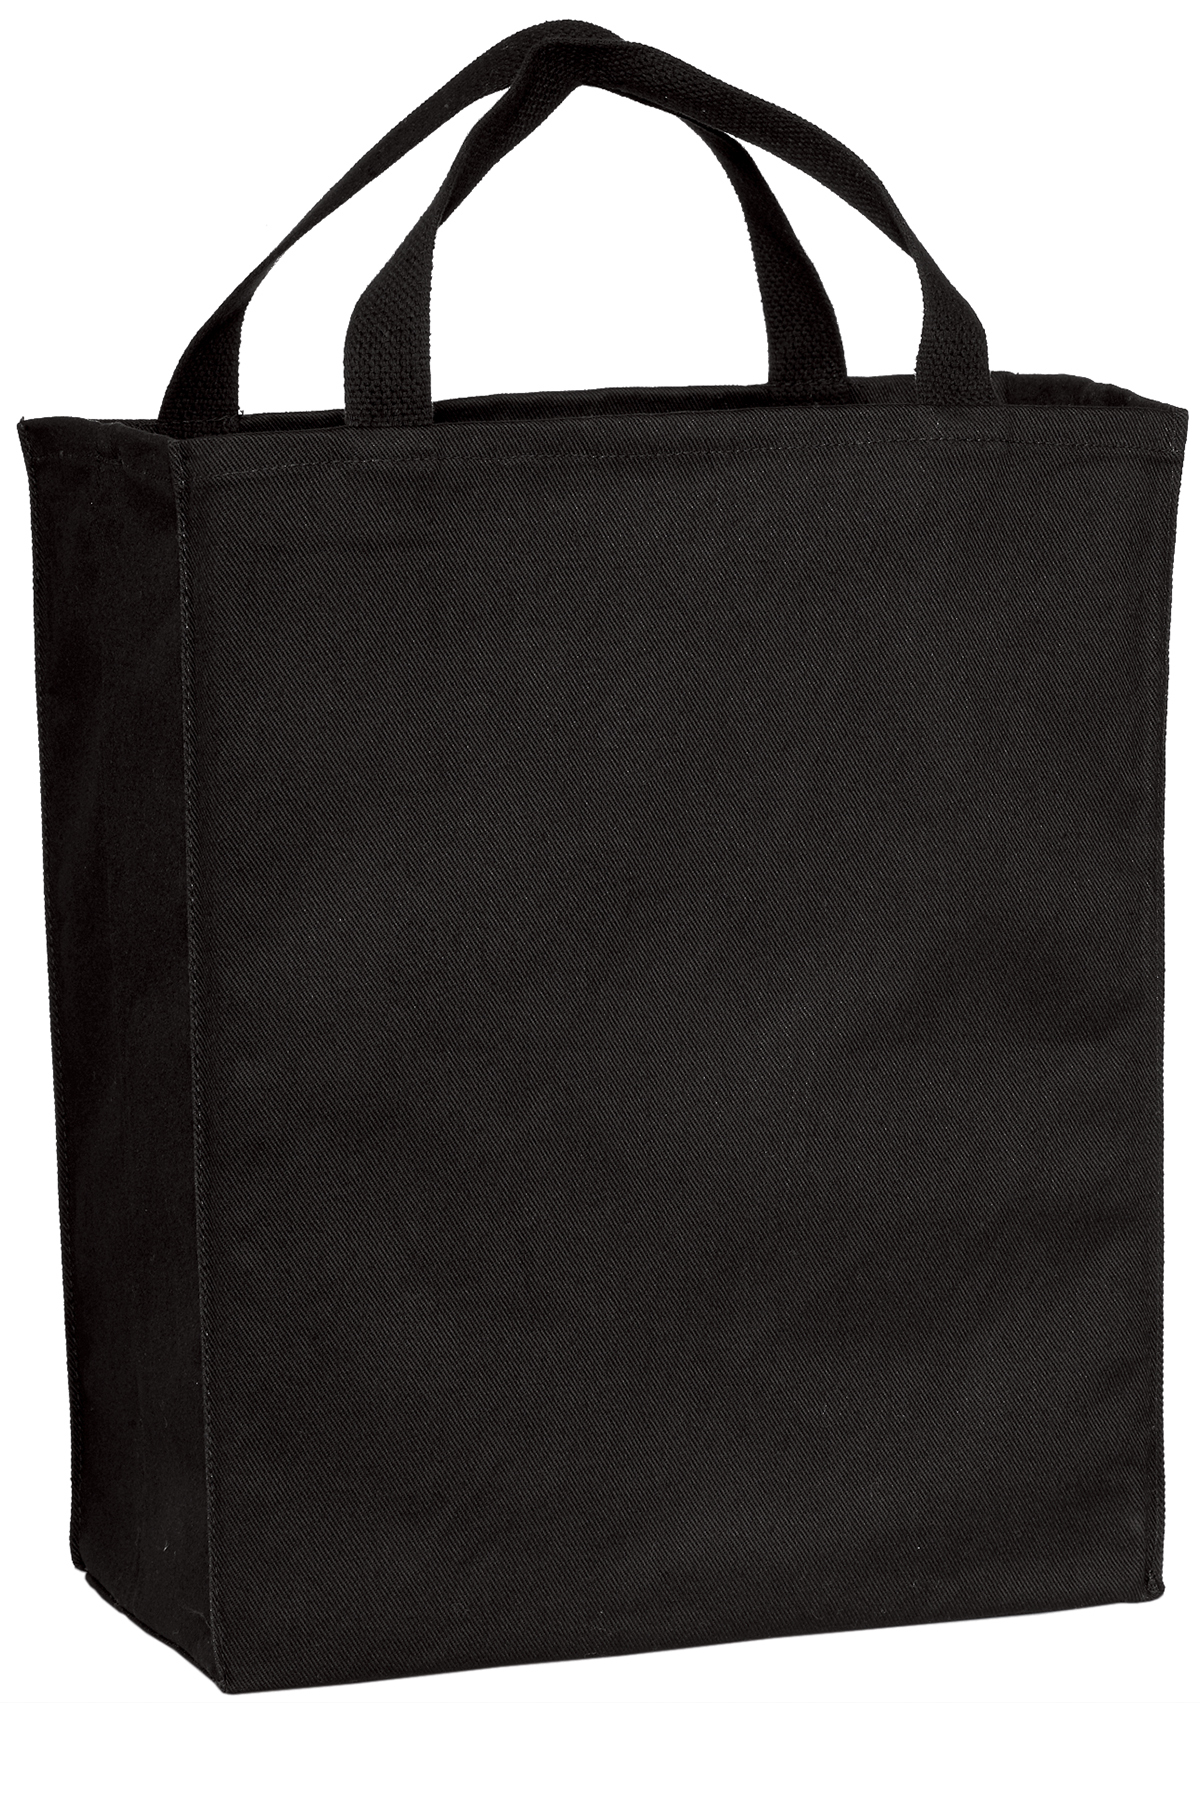 Port Authority  Grocery Tote  Grocery Totes  Bags  SanMar